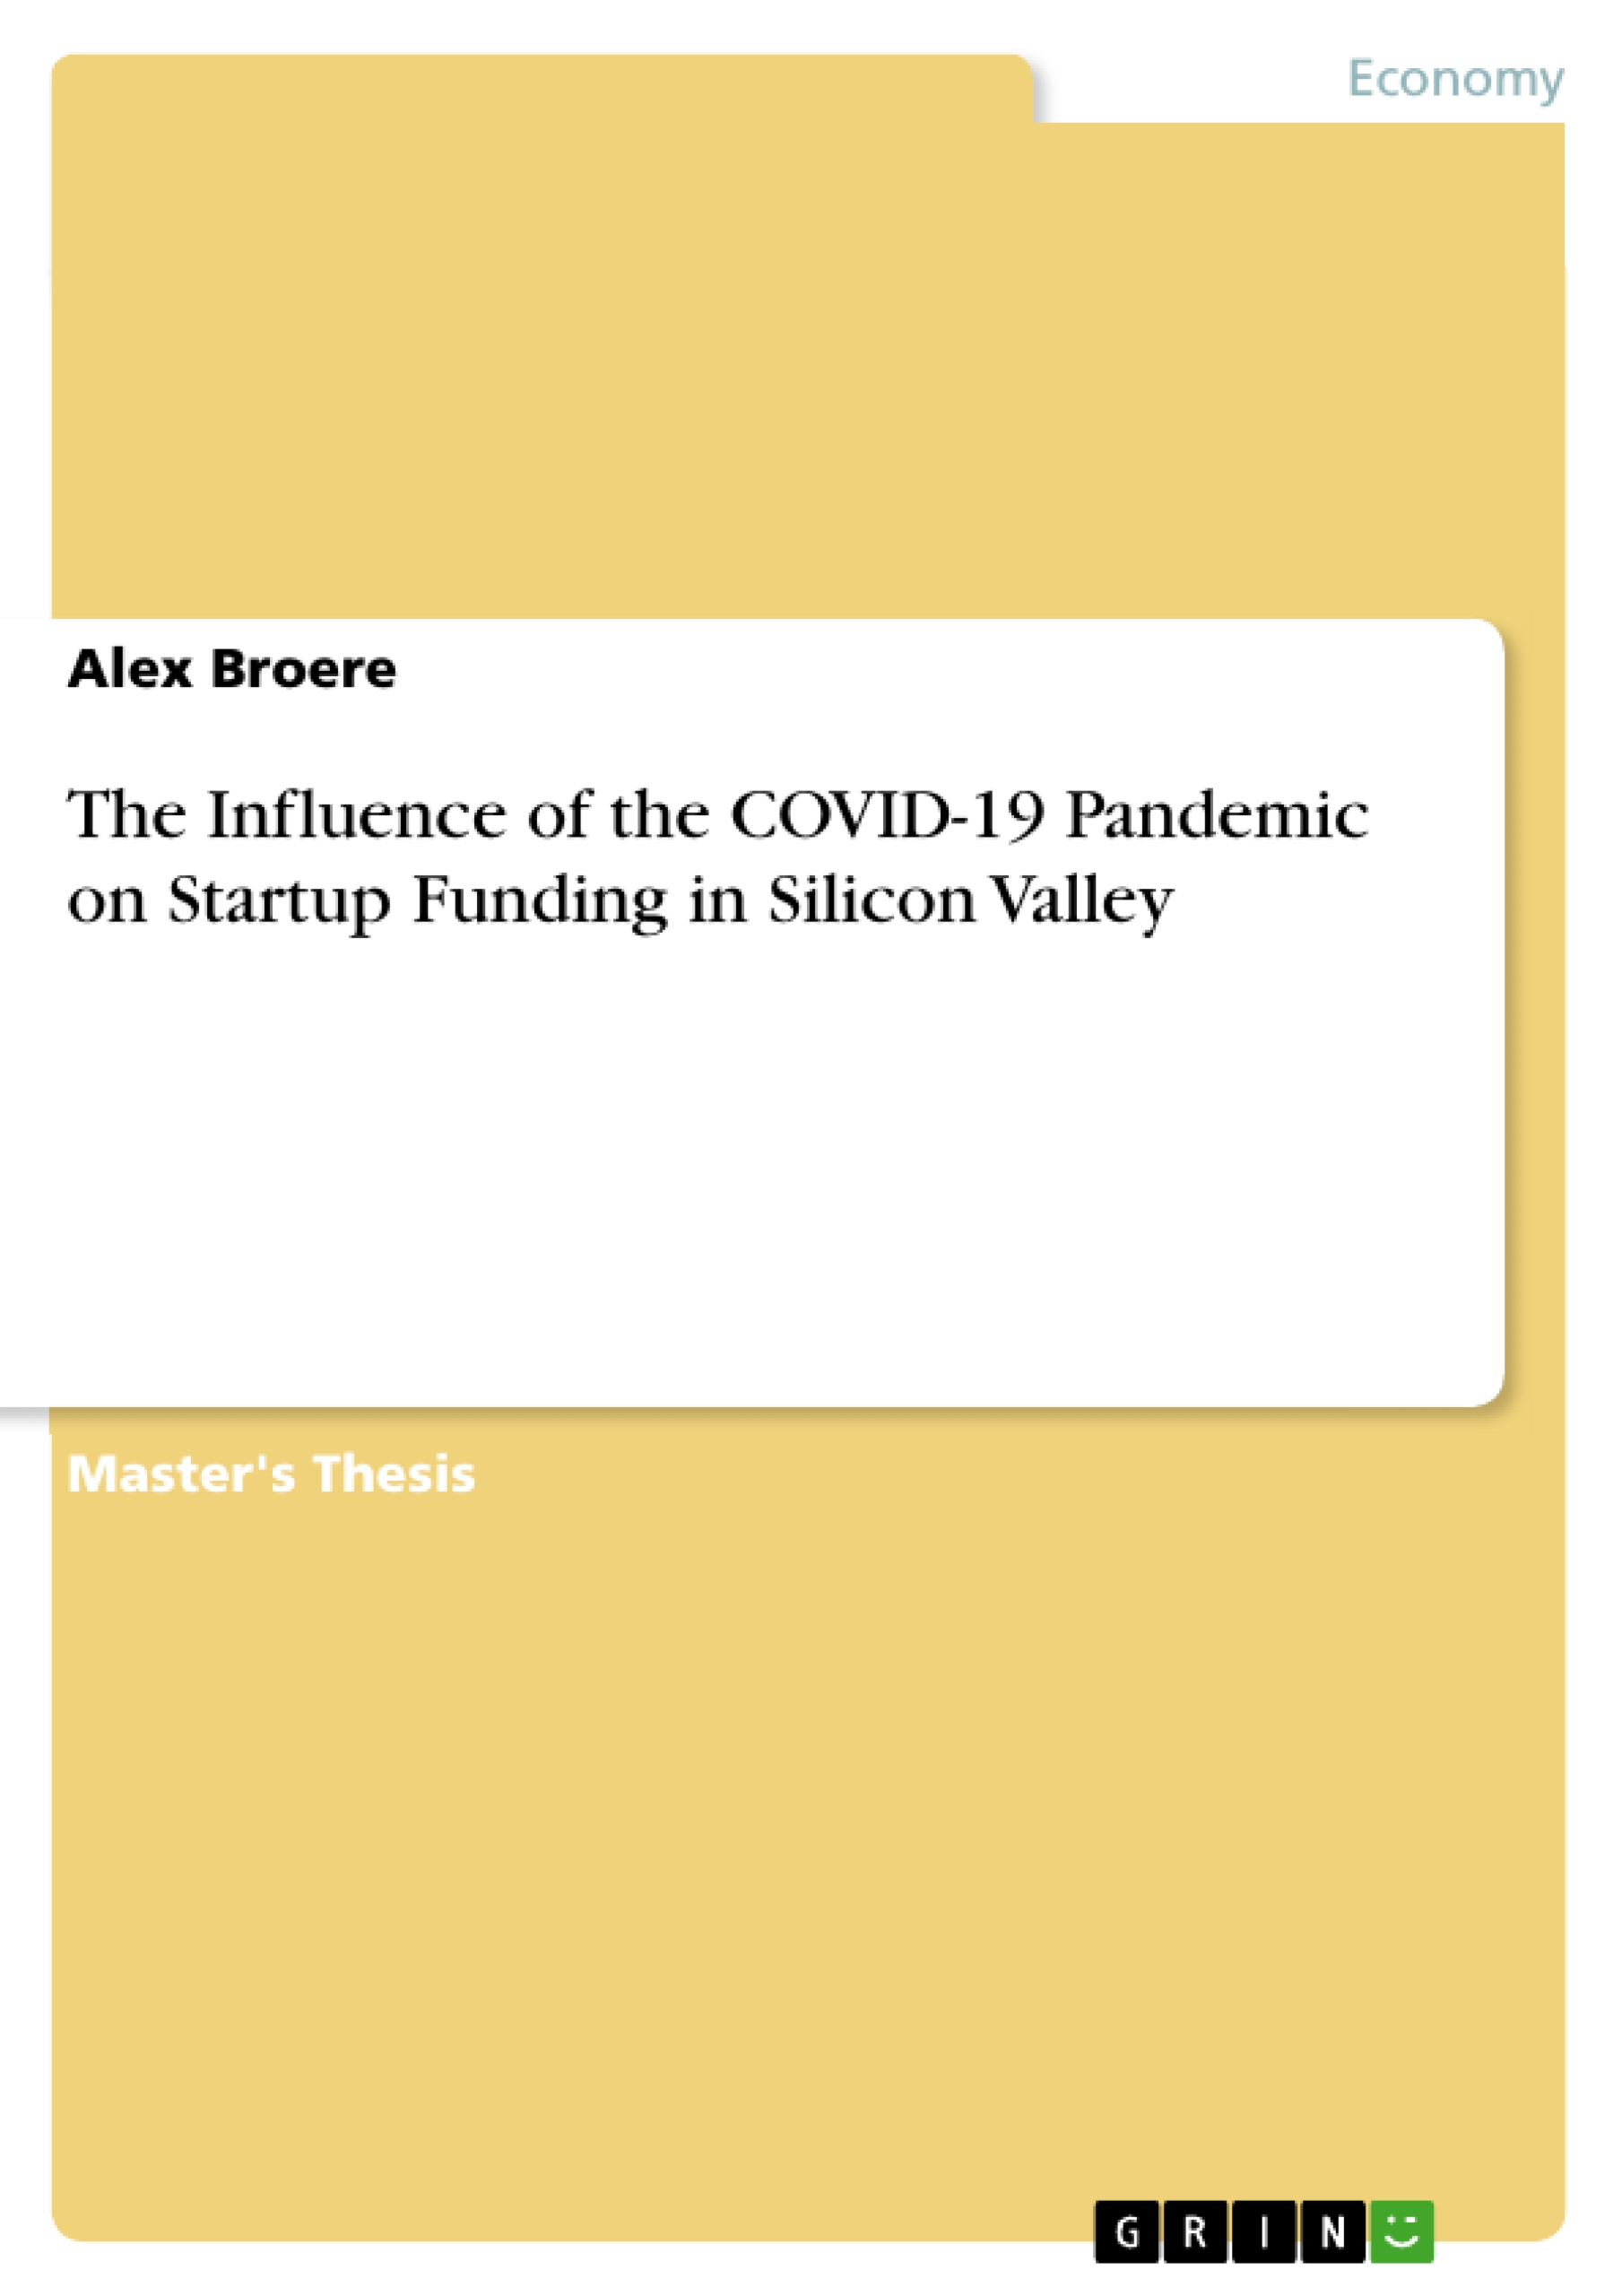 The Influence of the COVID-19 Pandemic on Startup Funding in Silicon Valley